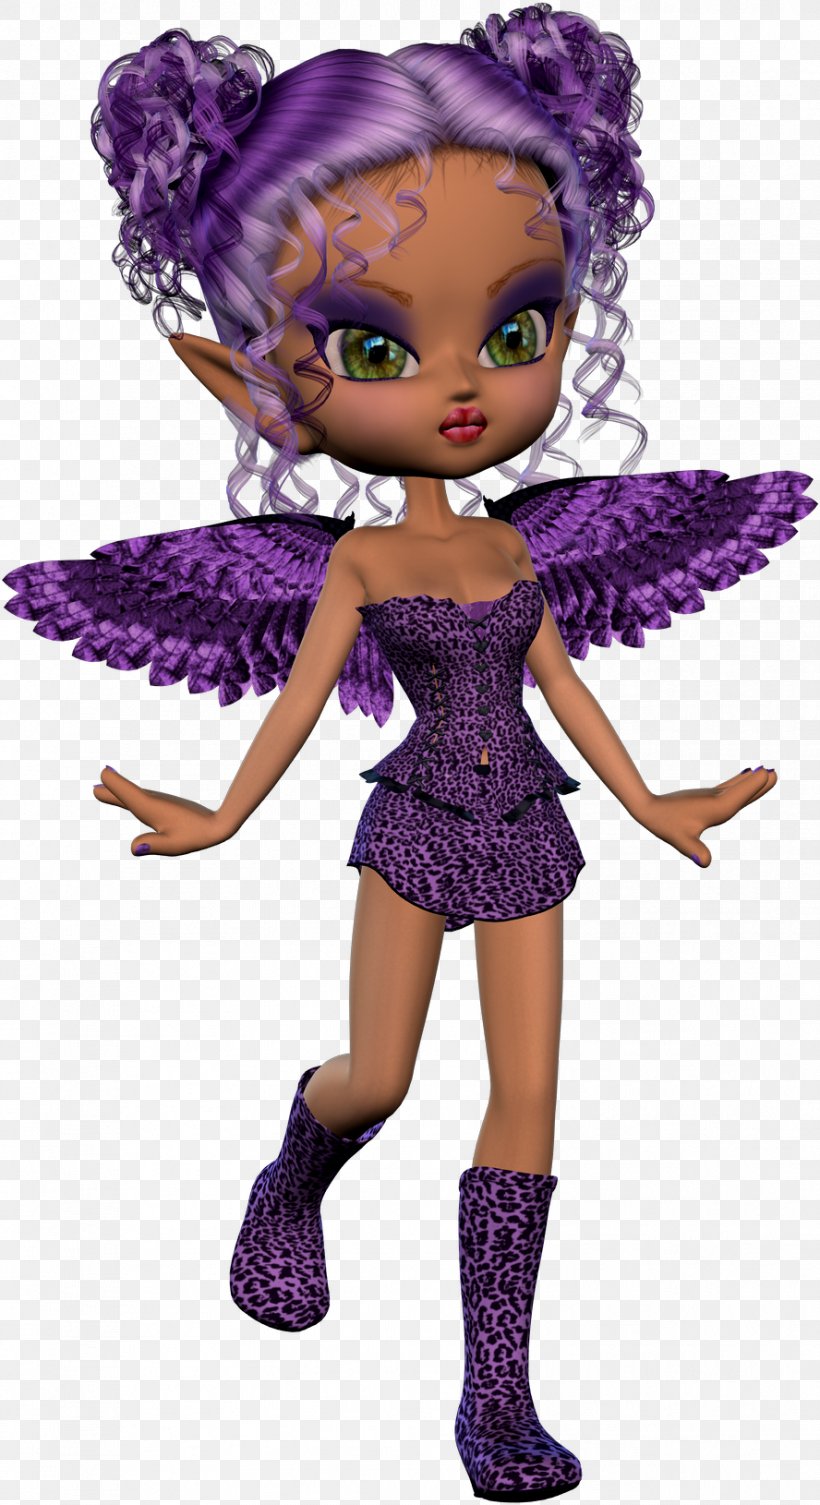 Barbie Lilac Violet Purple Doll, PNG, 888x1630px, Barbie, Character, Doll, Fairy, Fiction Download Free